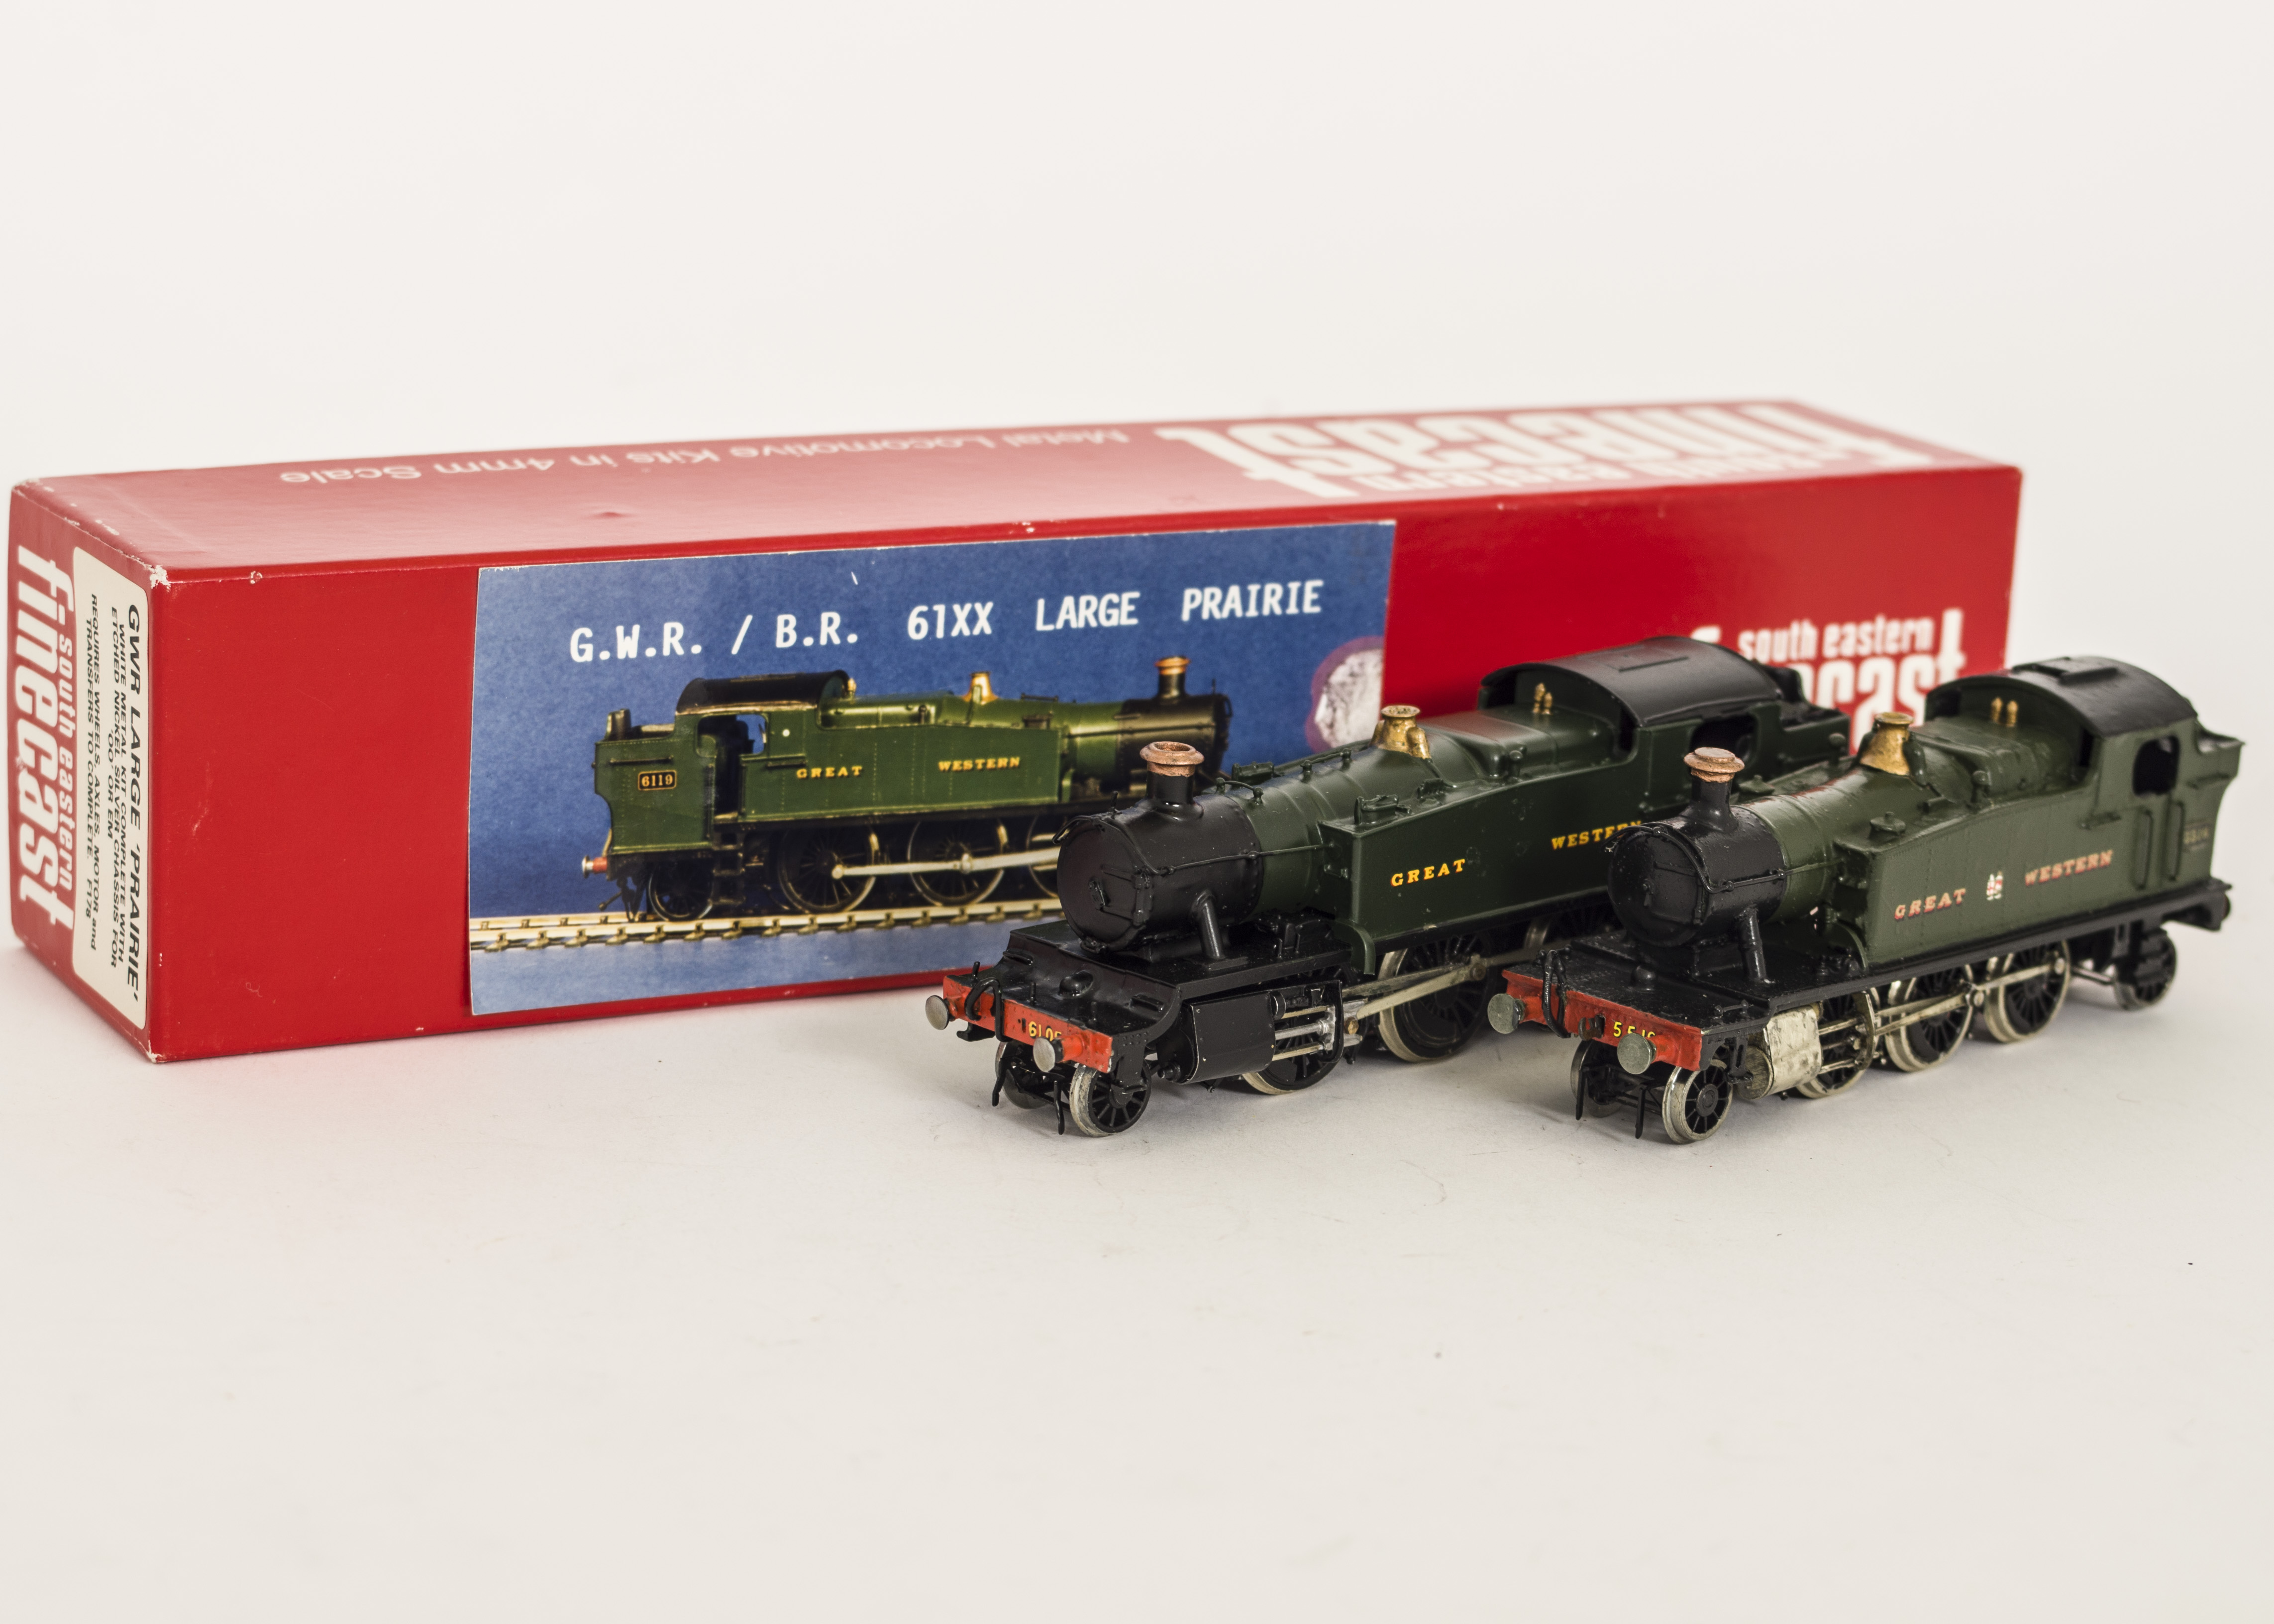 A pair of South Eastern Finecast 00 Gauge Kitbuilt GWR 2-6-2 Tank Locomotives GWR green 61XX large